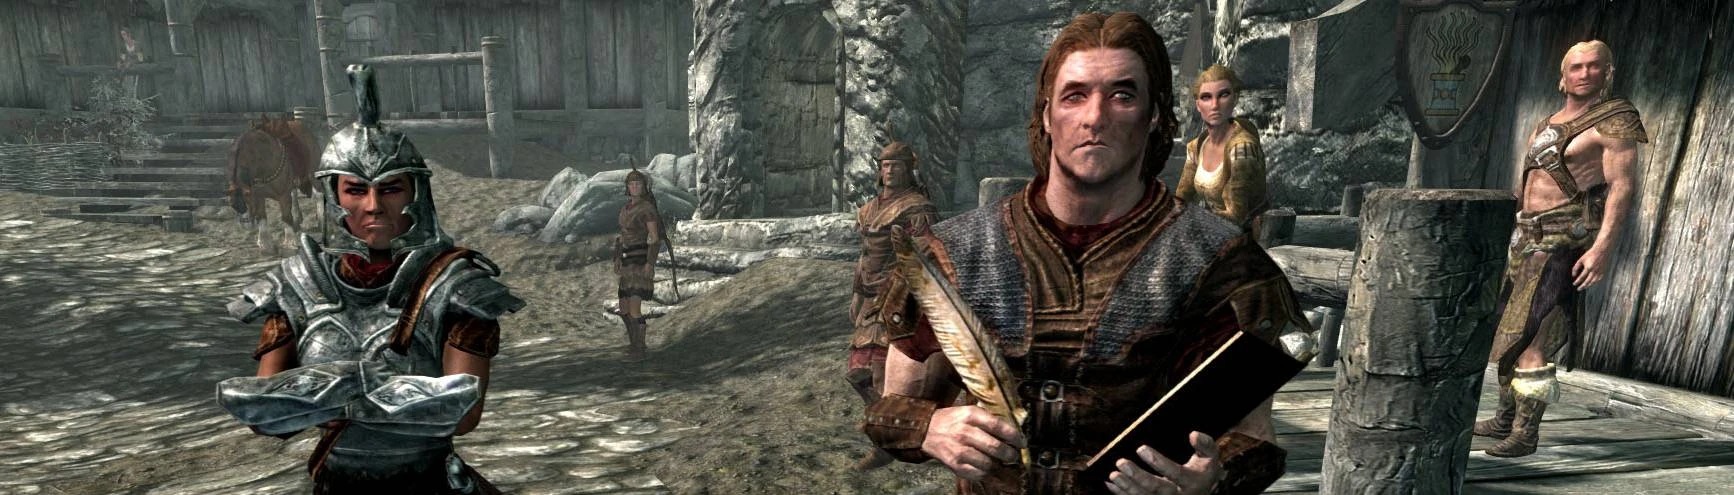 Skyrim' mod that stops you playing 'Skyrim' removed from Nexus Mods